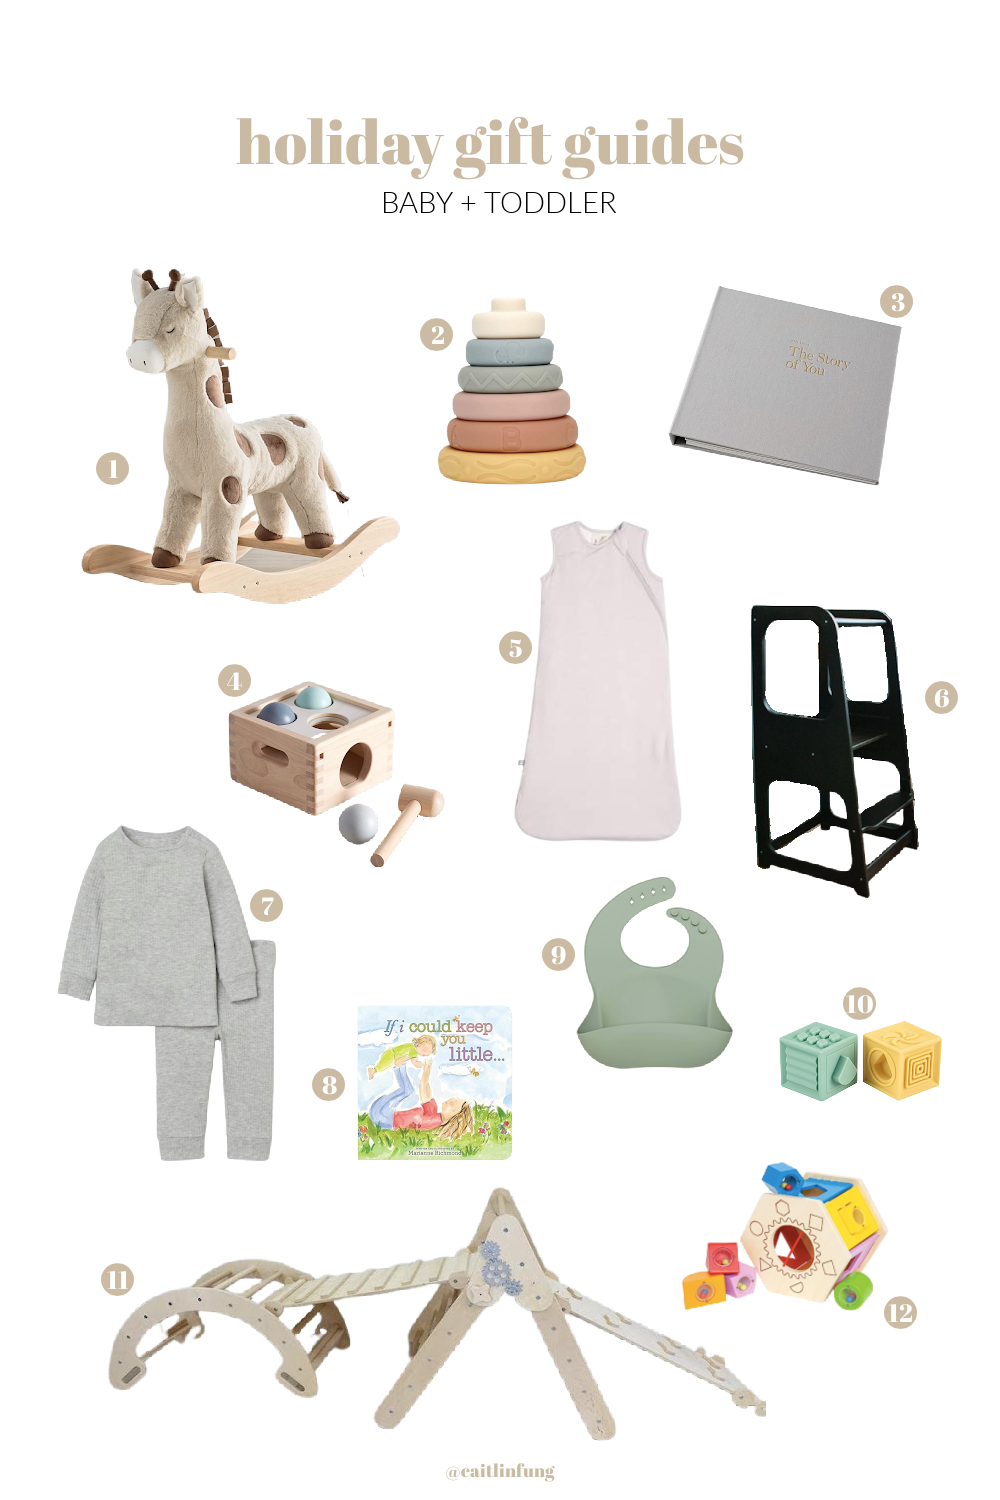 Holiday Gift Guide for babies and toddlers